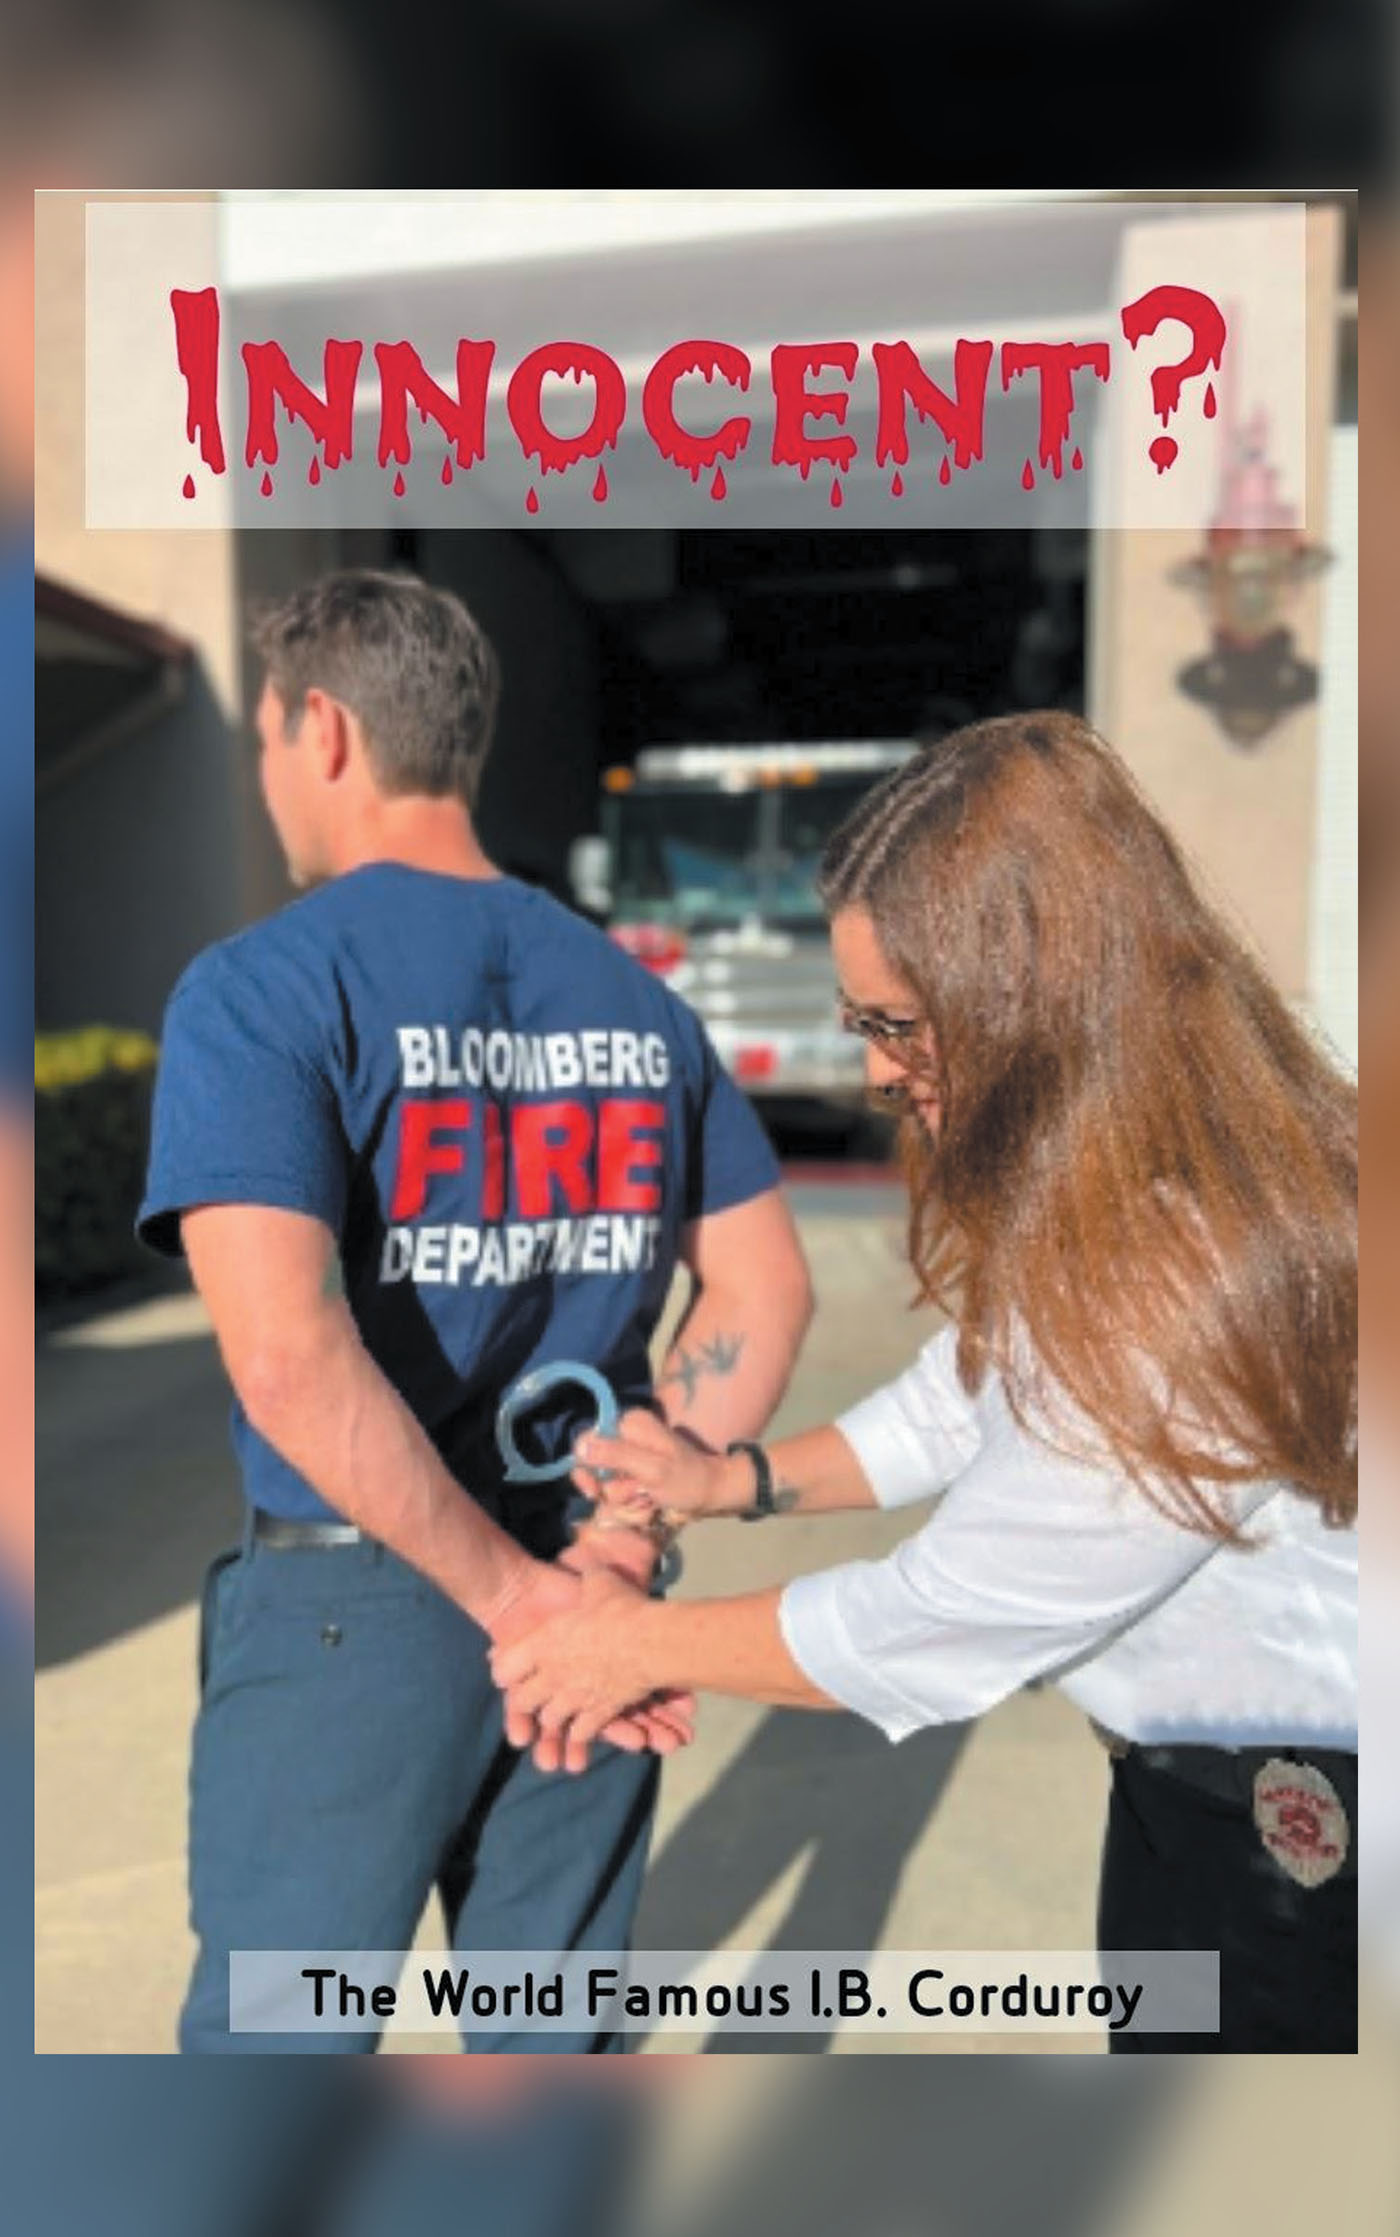 Author The World-Famous I.B. Corduroy’s New Book, “Innocent?” Explores the Trial of a Firefighter Who is Accused of Murder But Swears He's Innocent Despite the Evidence